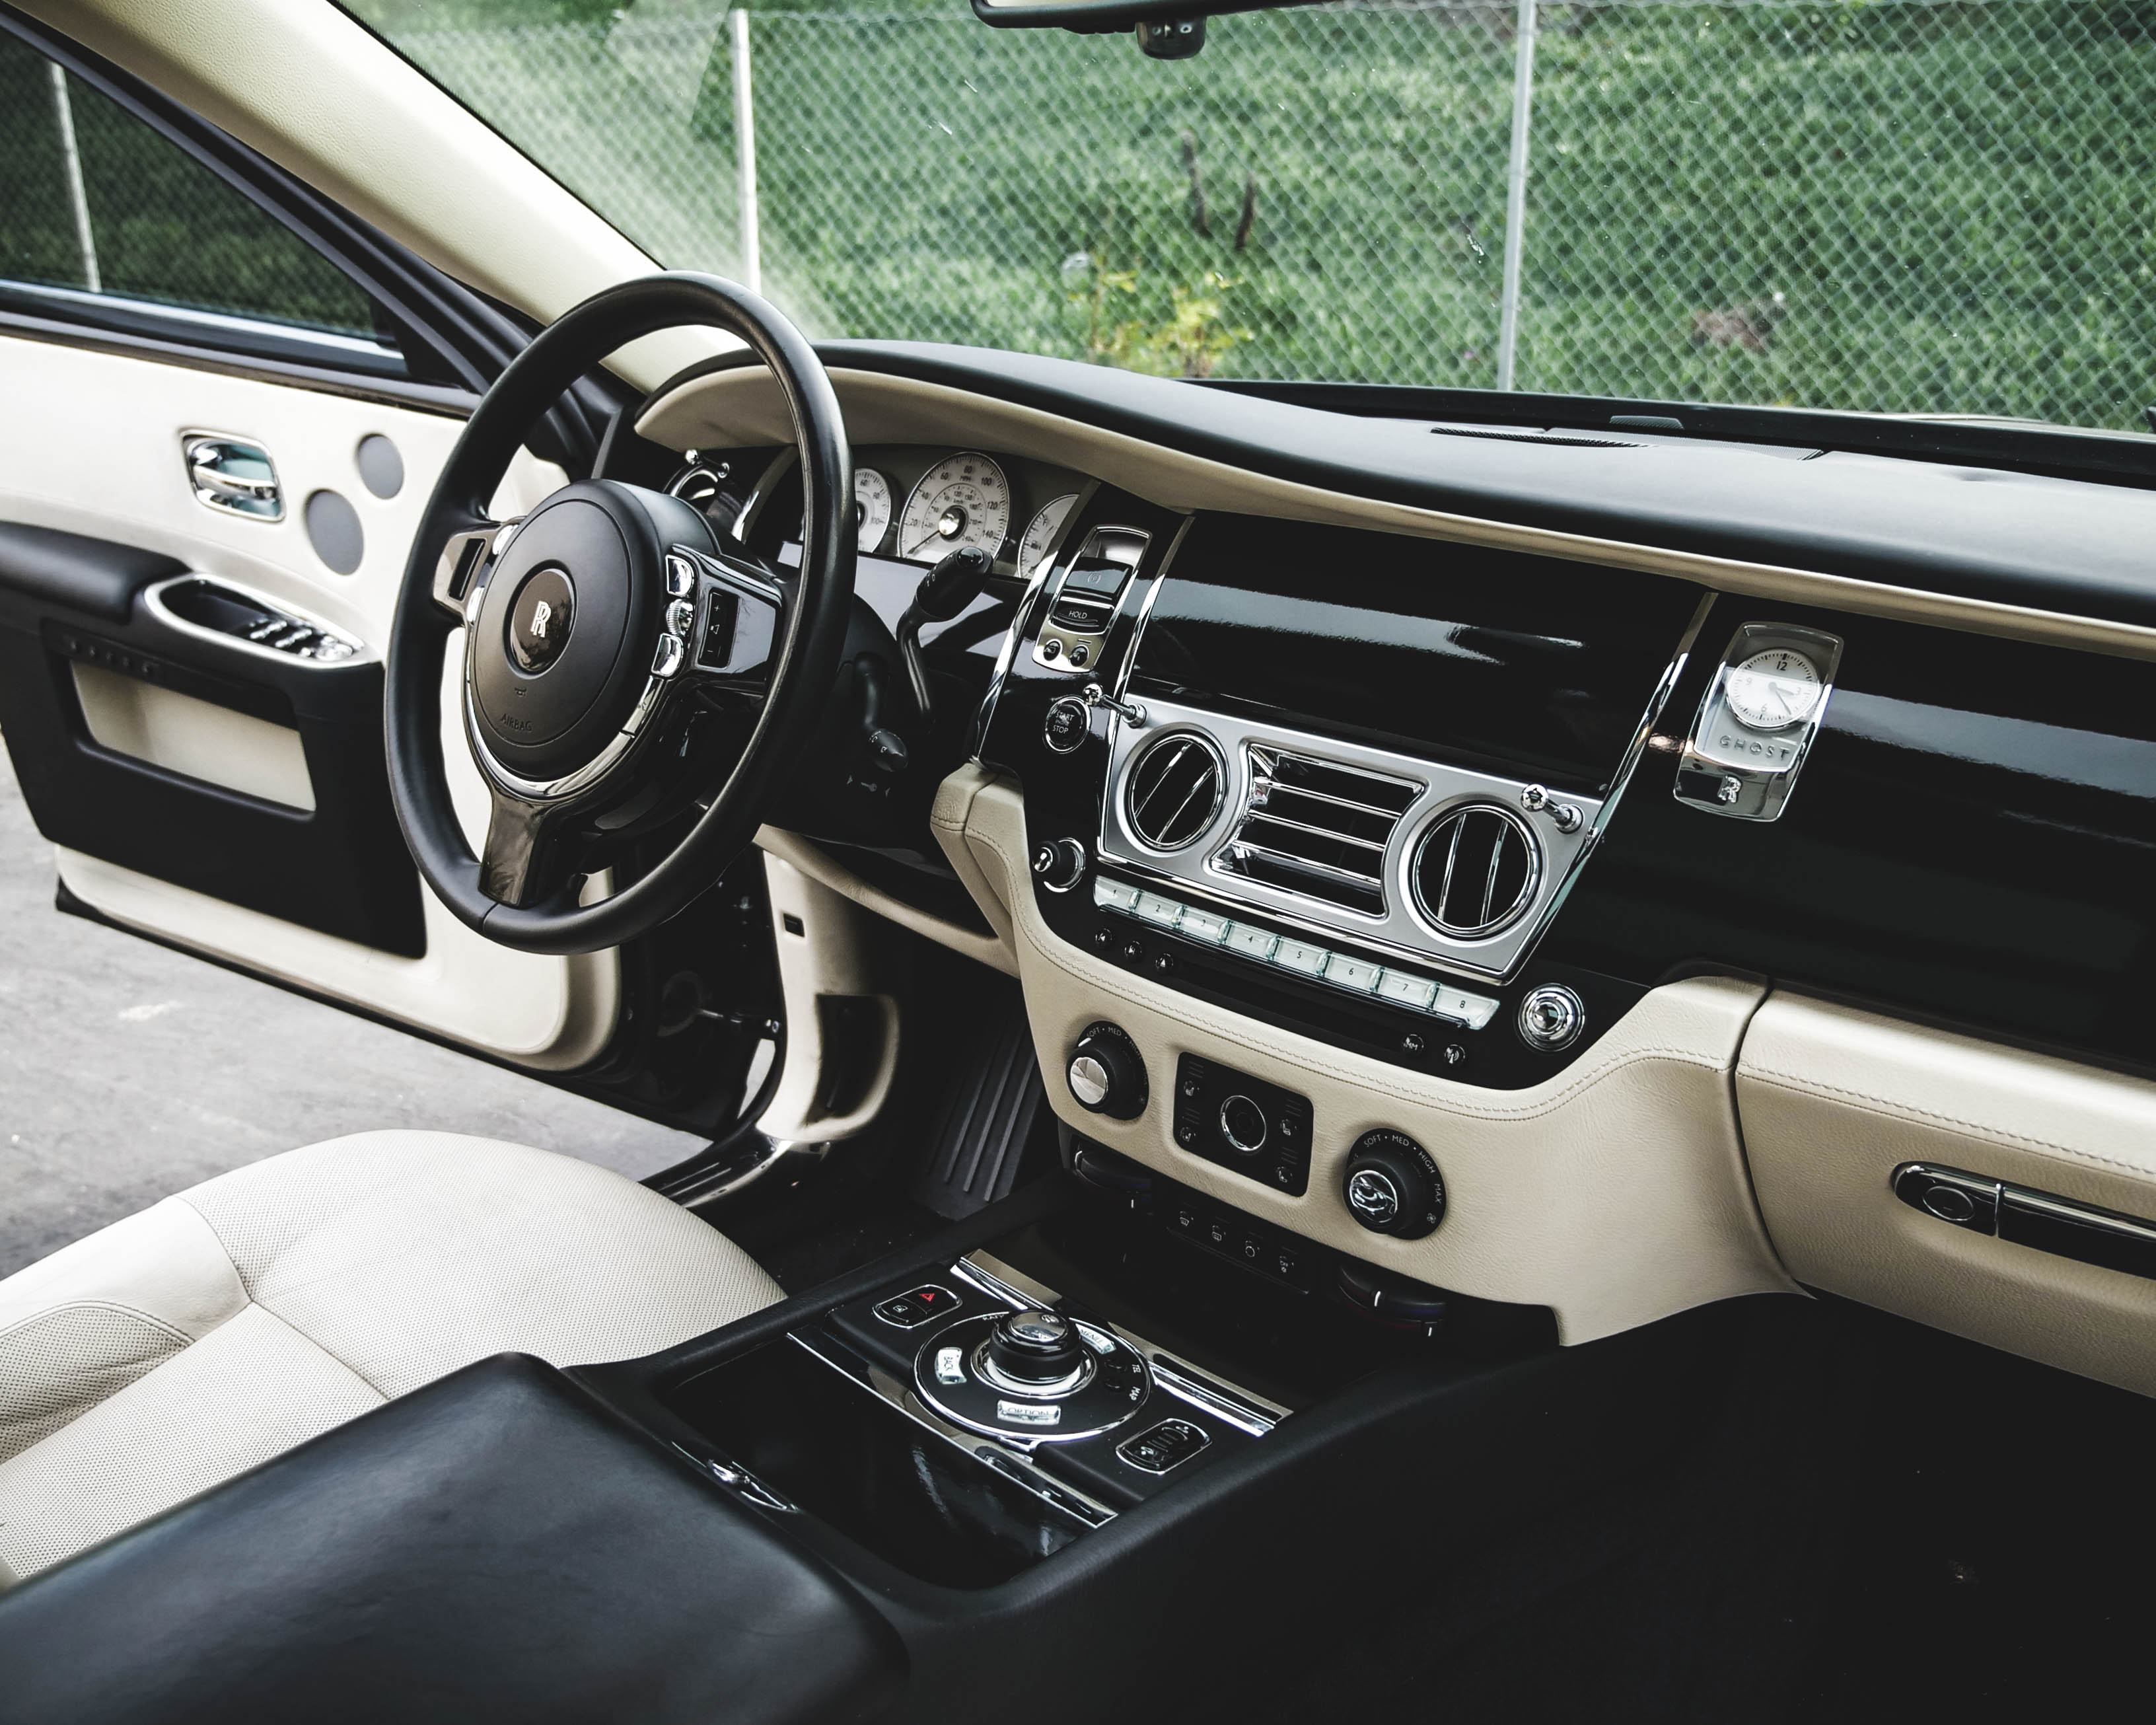 Luxury car interior with white leather seats and shiny dashboard